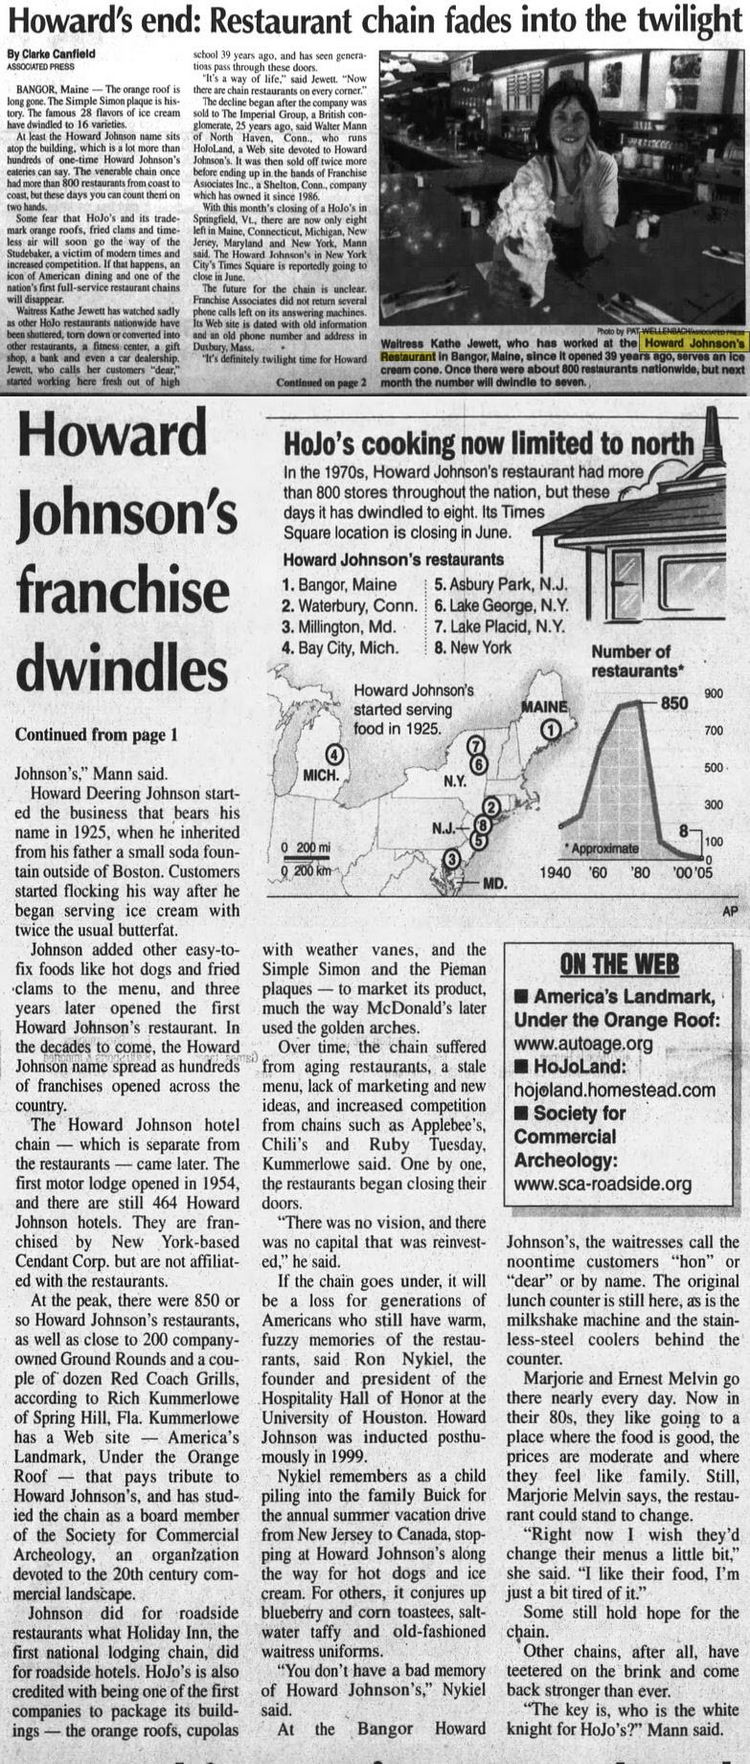 Howard Johnsons Restaurant - May 18 2005 Article - The End